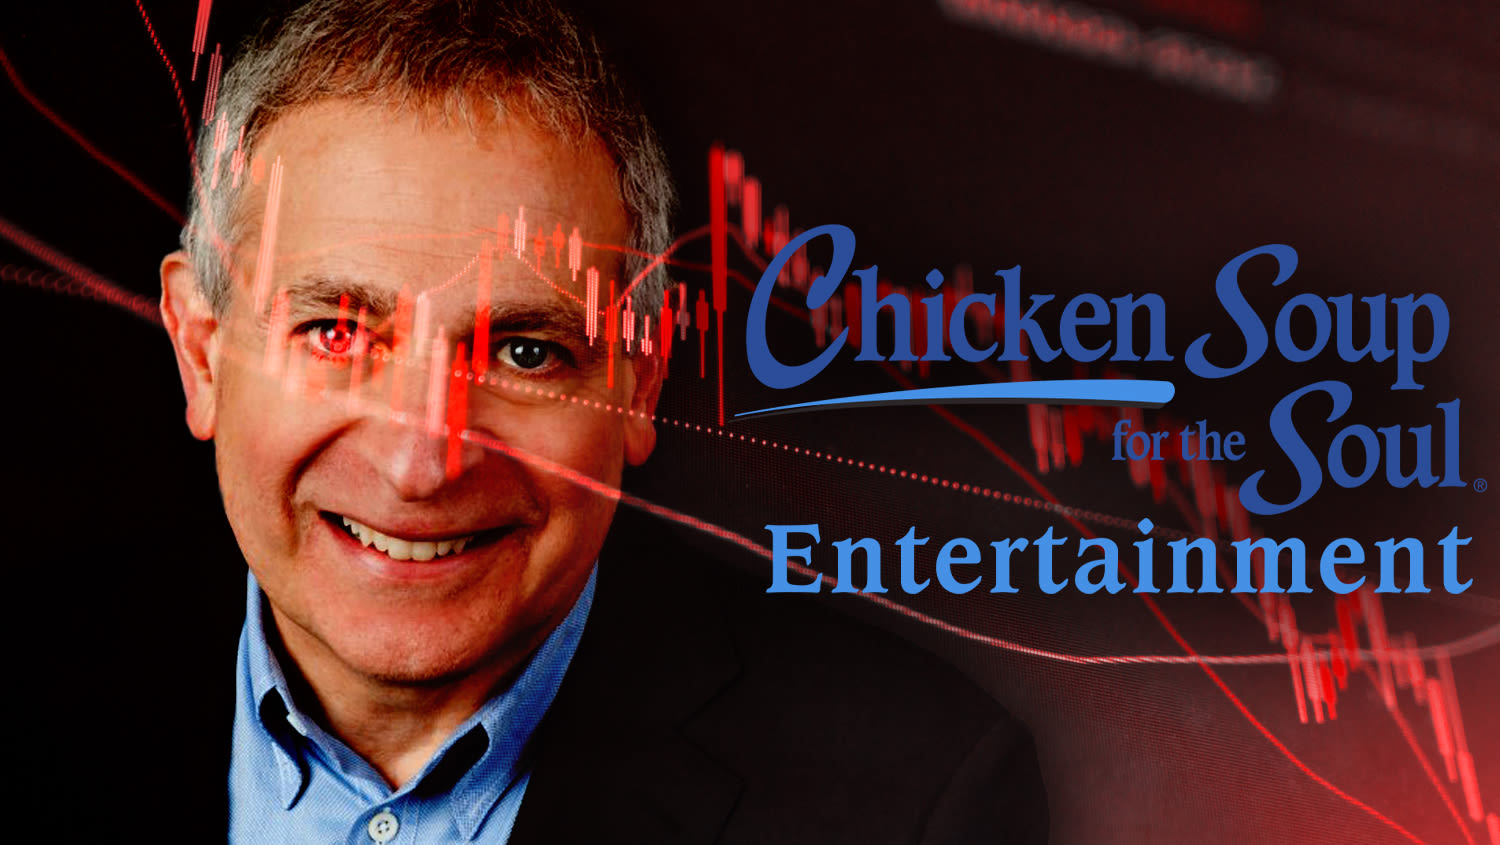 Former Employees Of Redbox Parent Chicken Soup For The Soul Entertainment Sue Bankrupt Company And Ex-CEO Bill Rouhana...